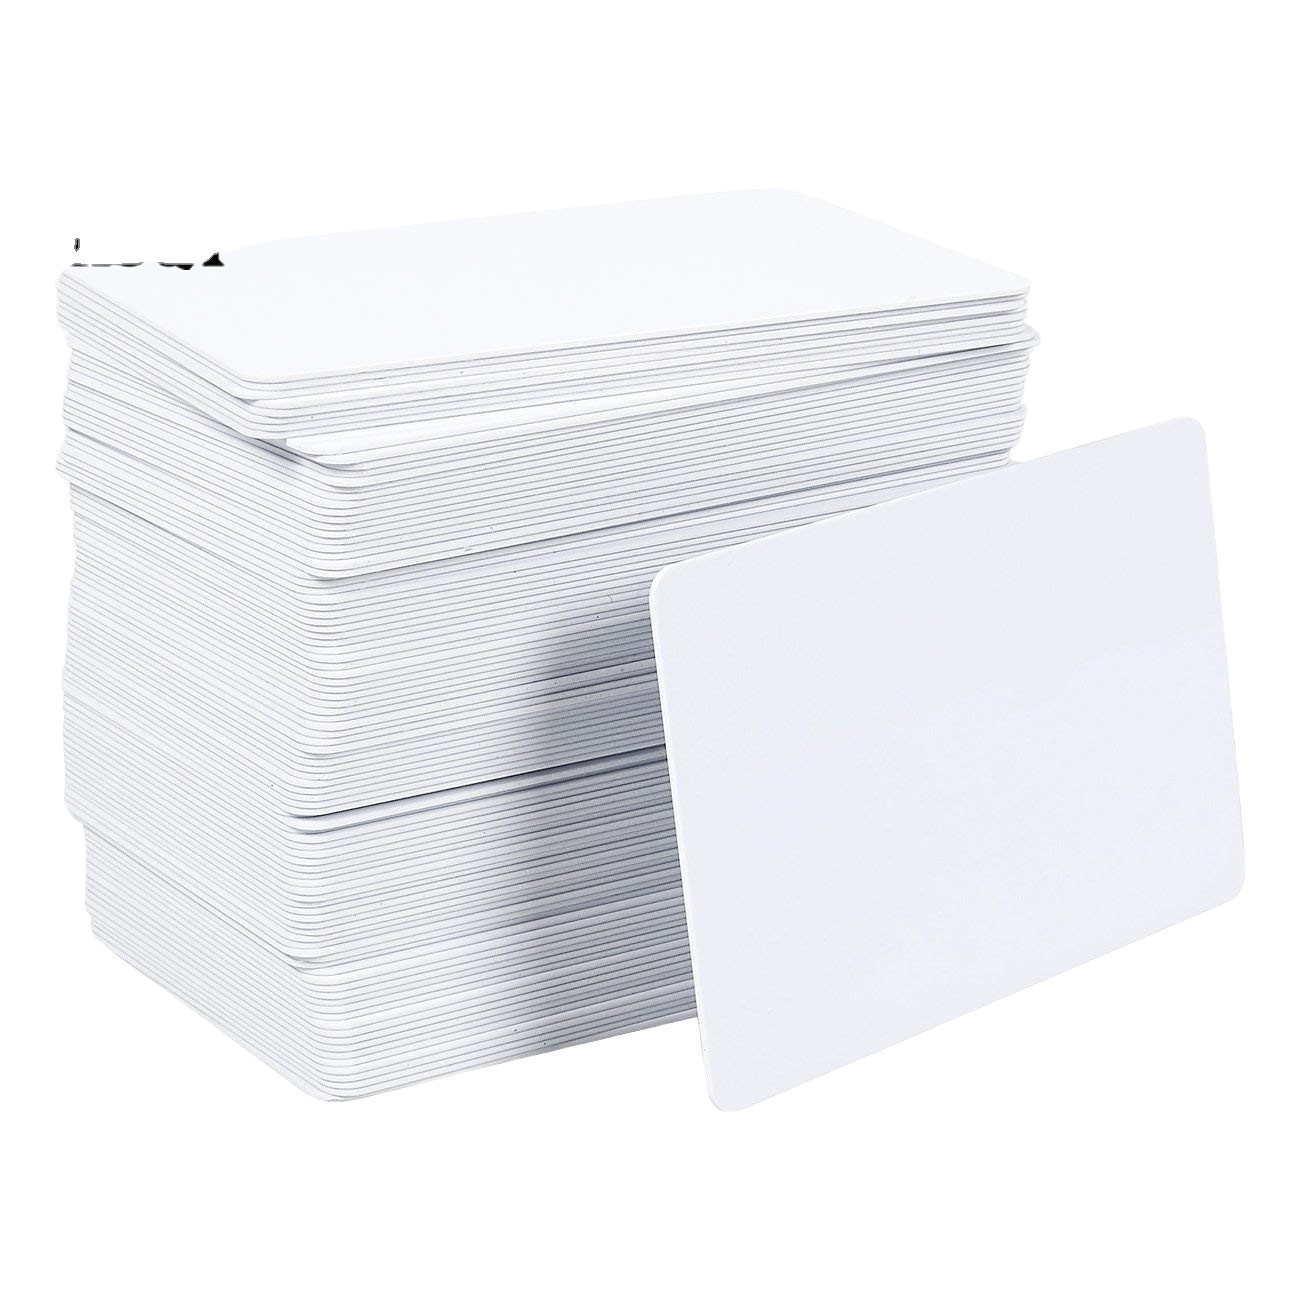 Plastic Card Pvc Sheets Manufacturers & Suppliers